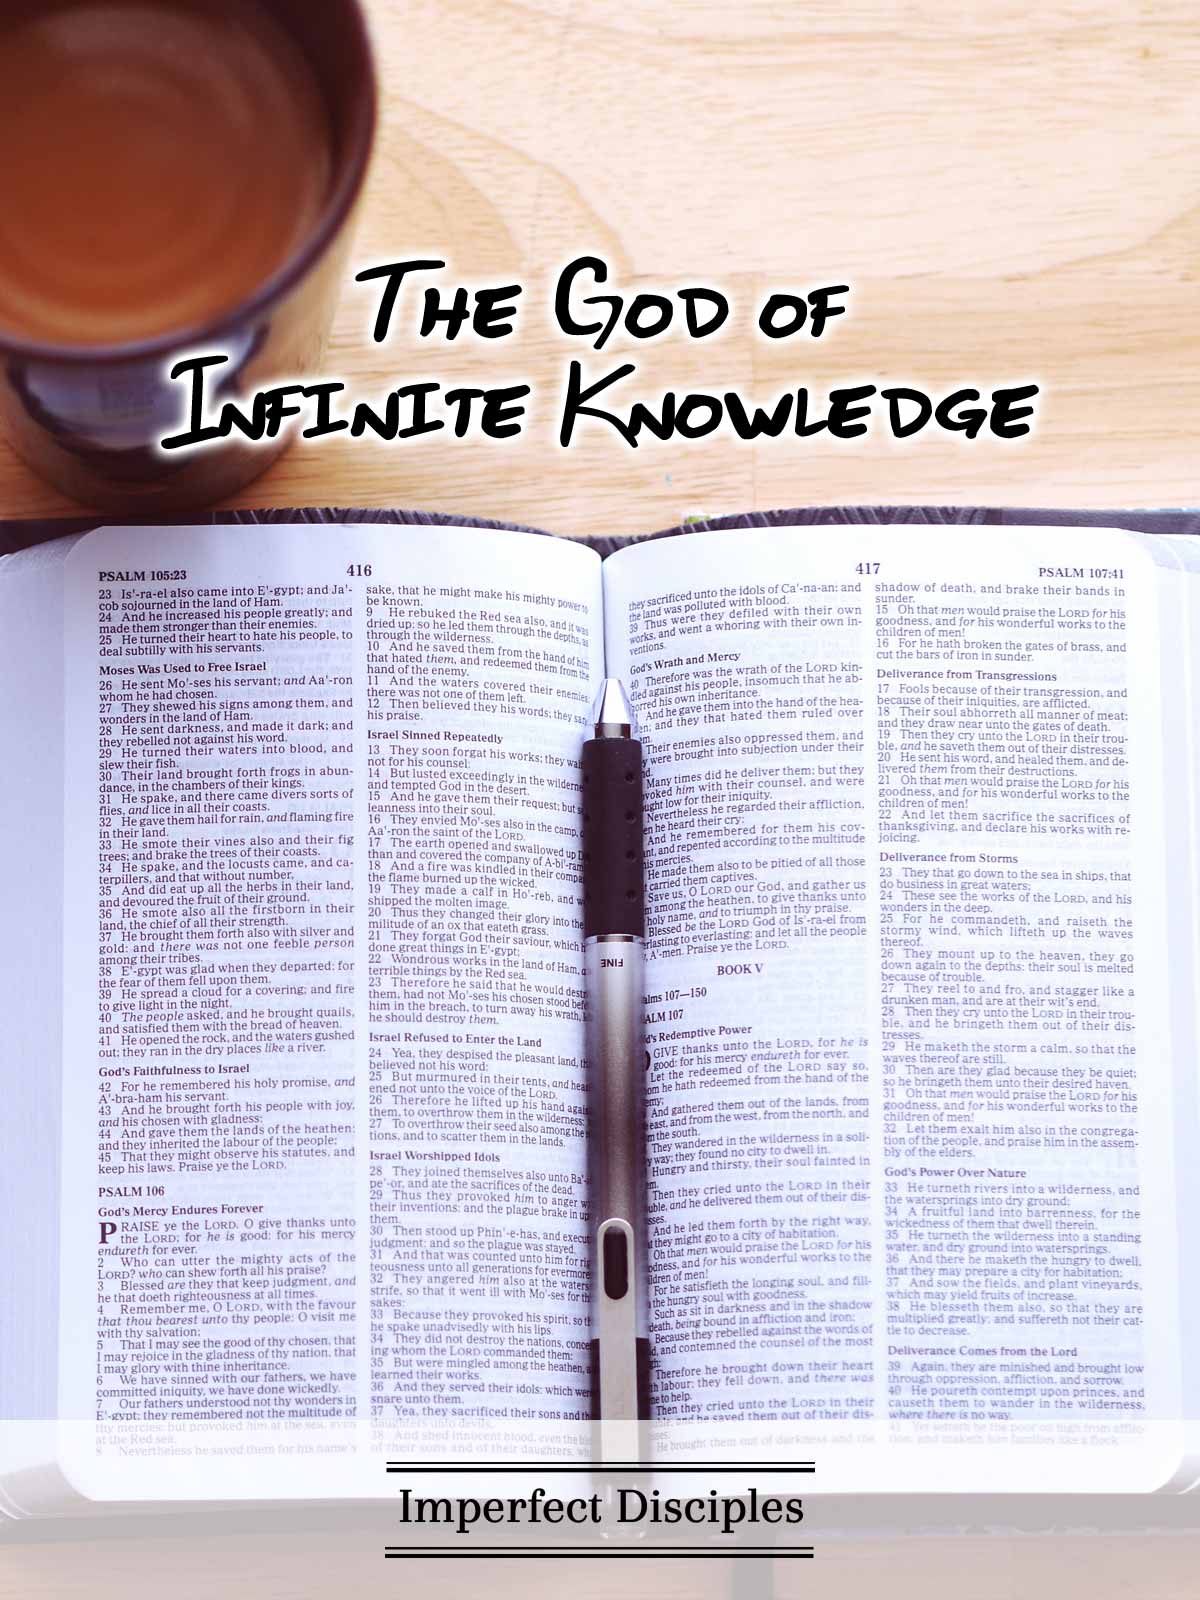 The God of Infinite Knowledge